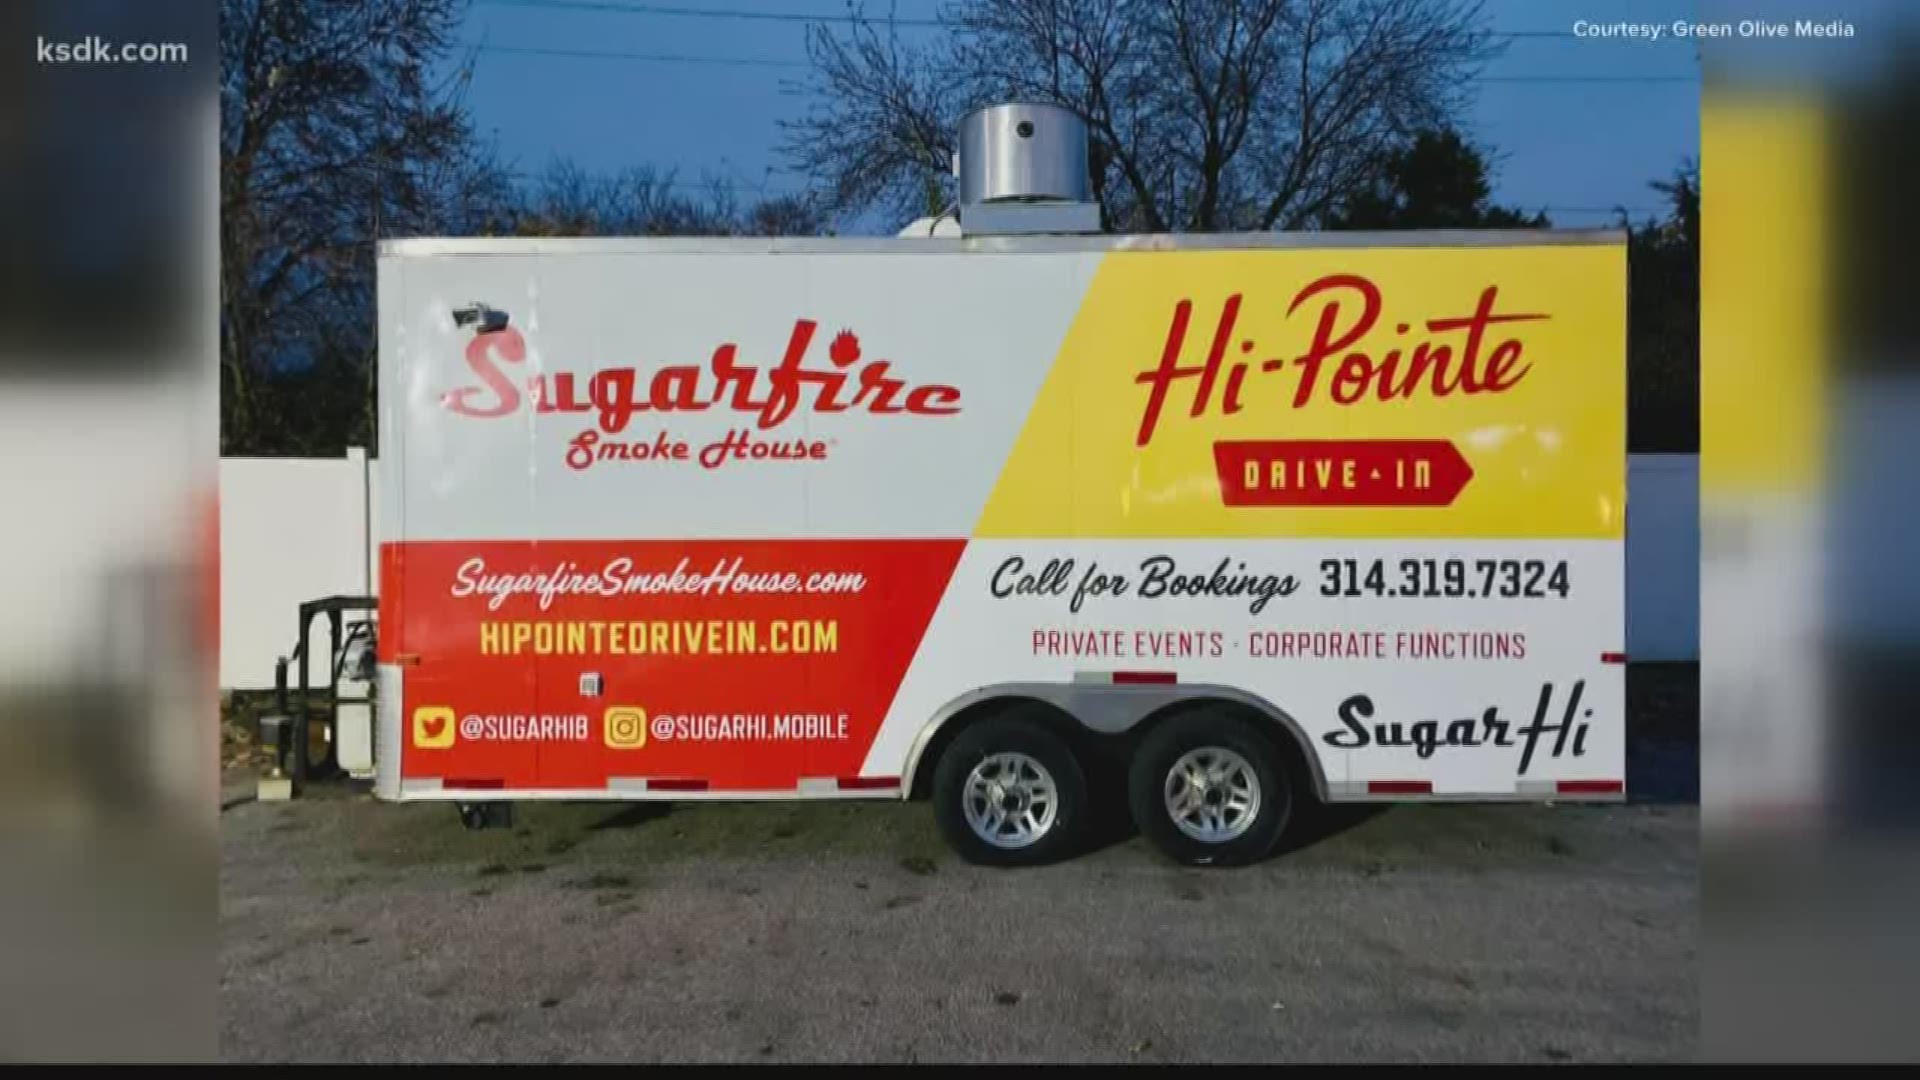 Sugarfire and Hi-Pointe Drive-In are combining for a new venture: a food truck called SugarHi. Mike Johnson talks about the new food spin-off.